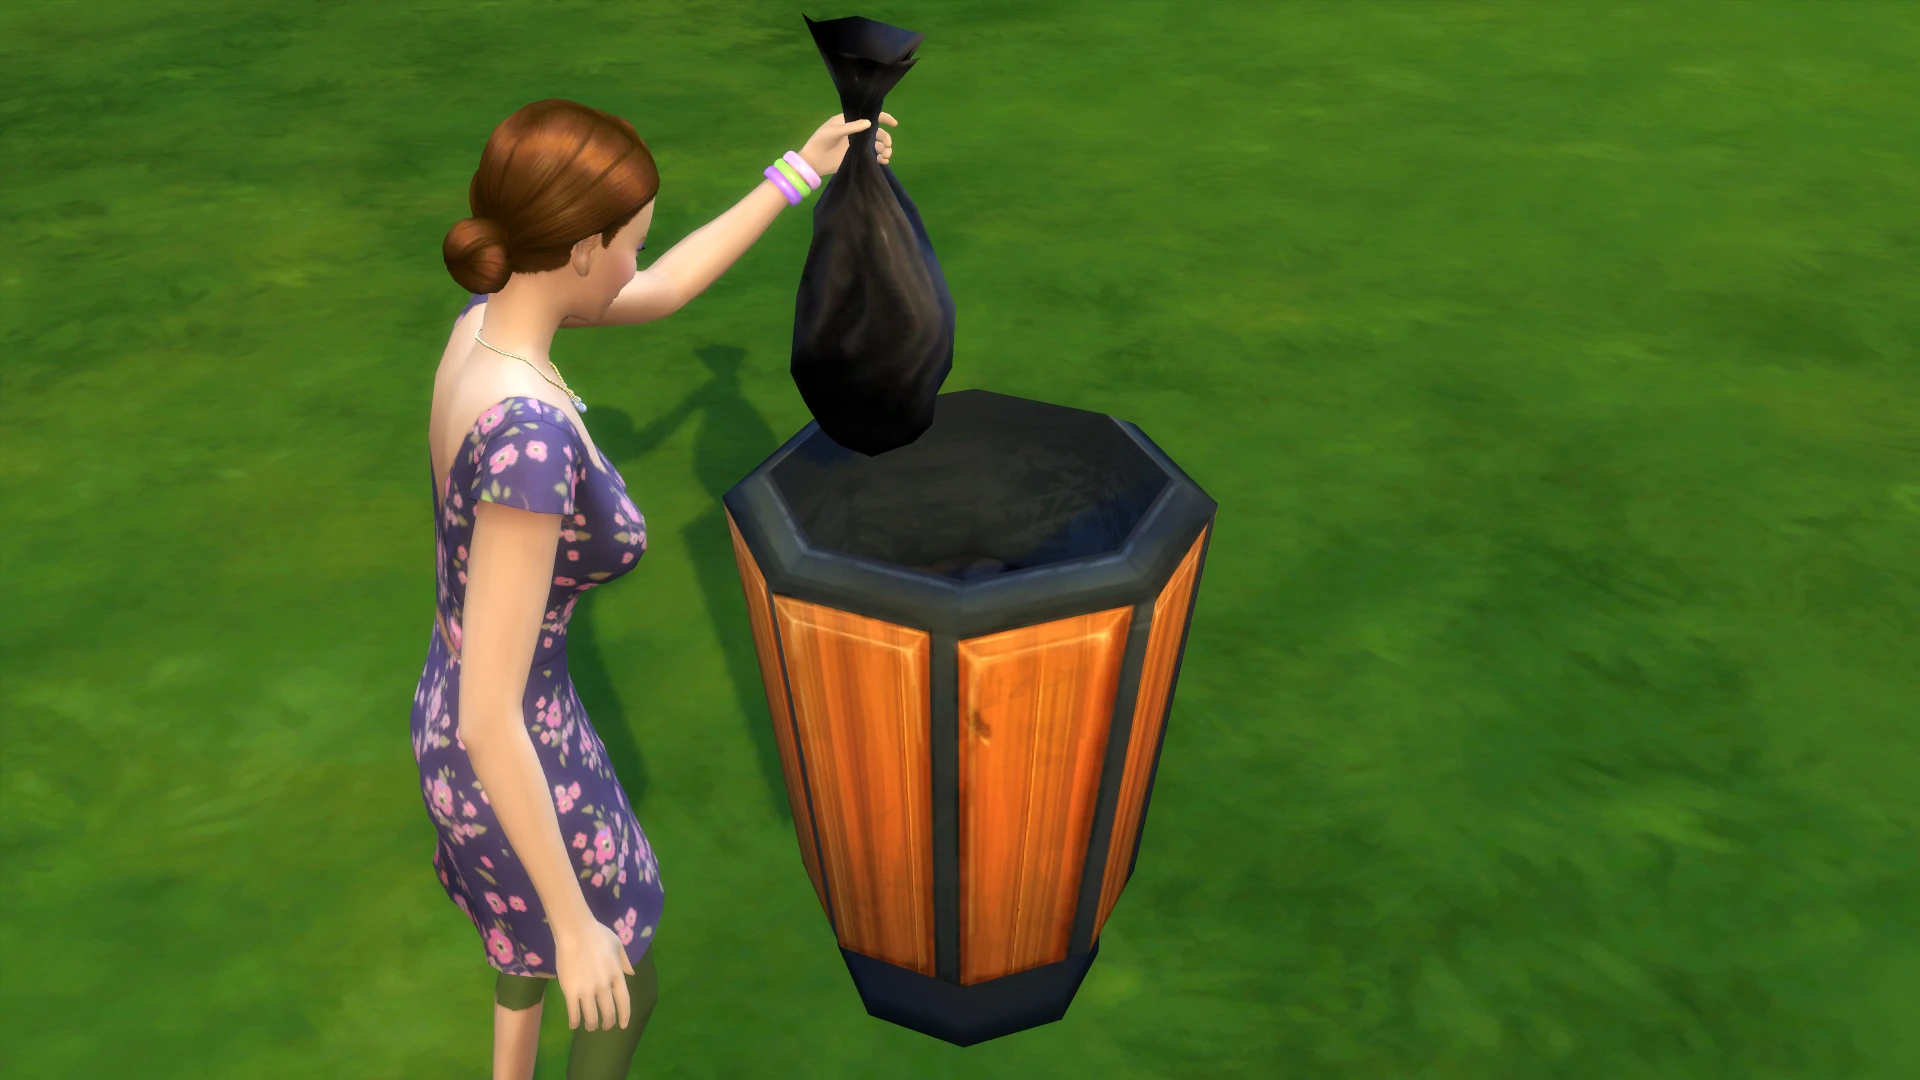 sims 4 money trash can not working